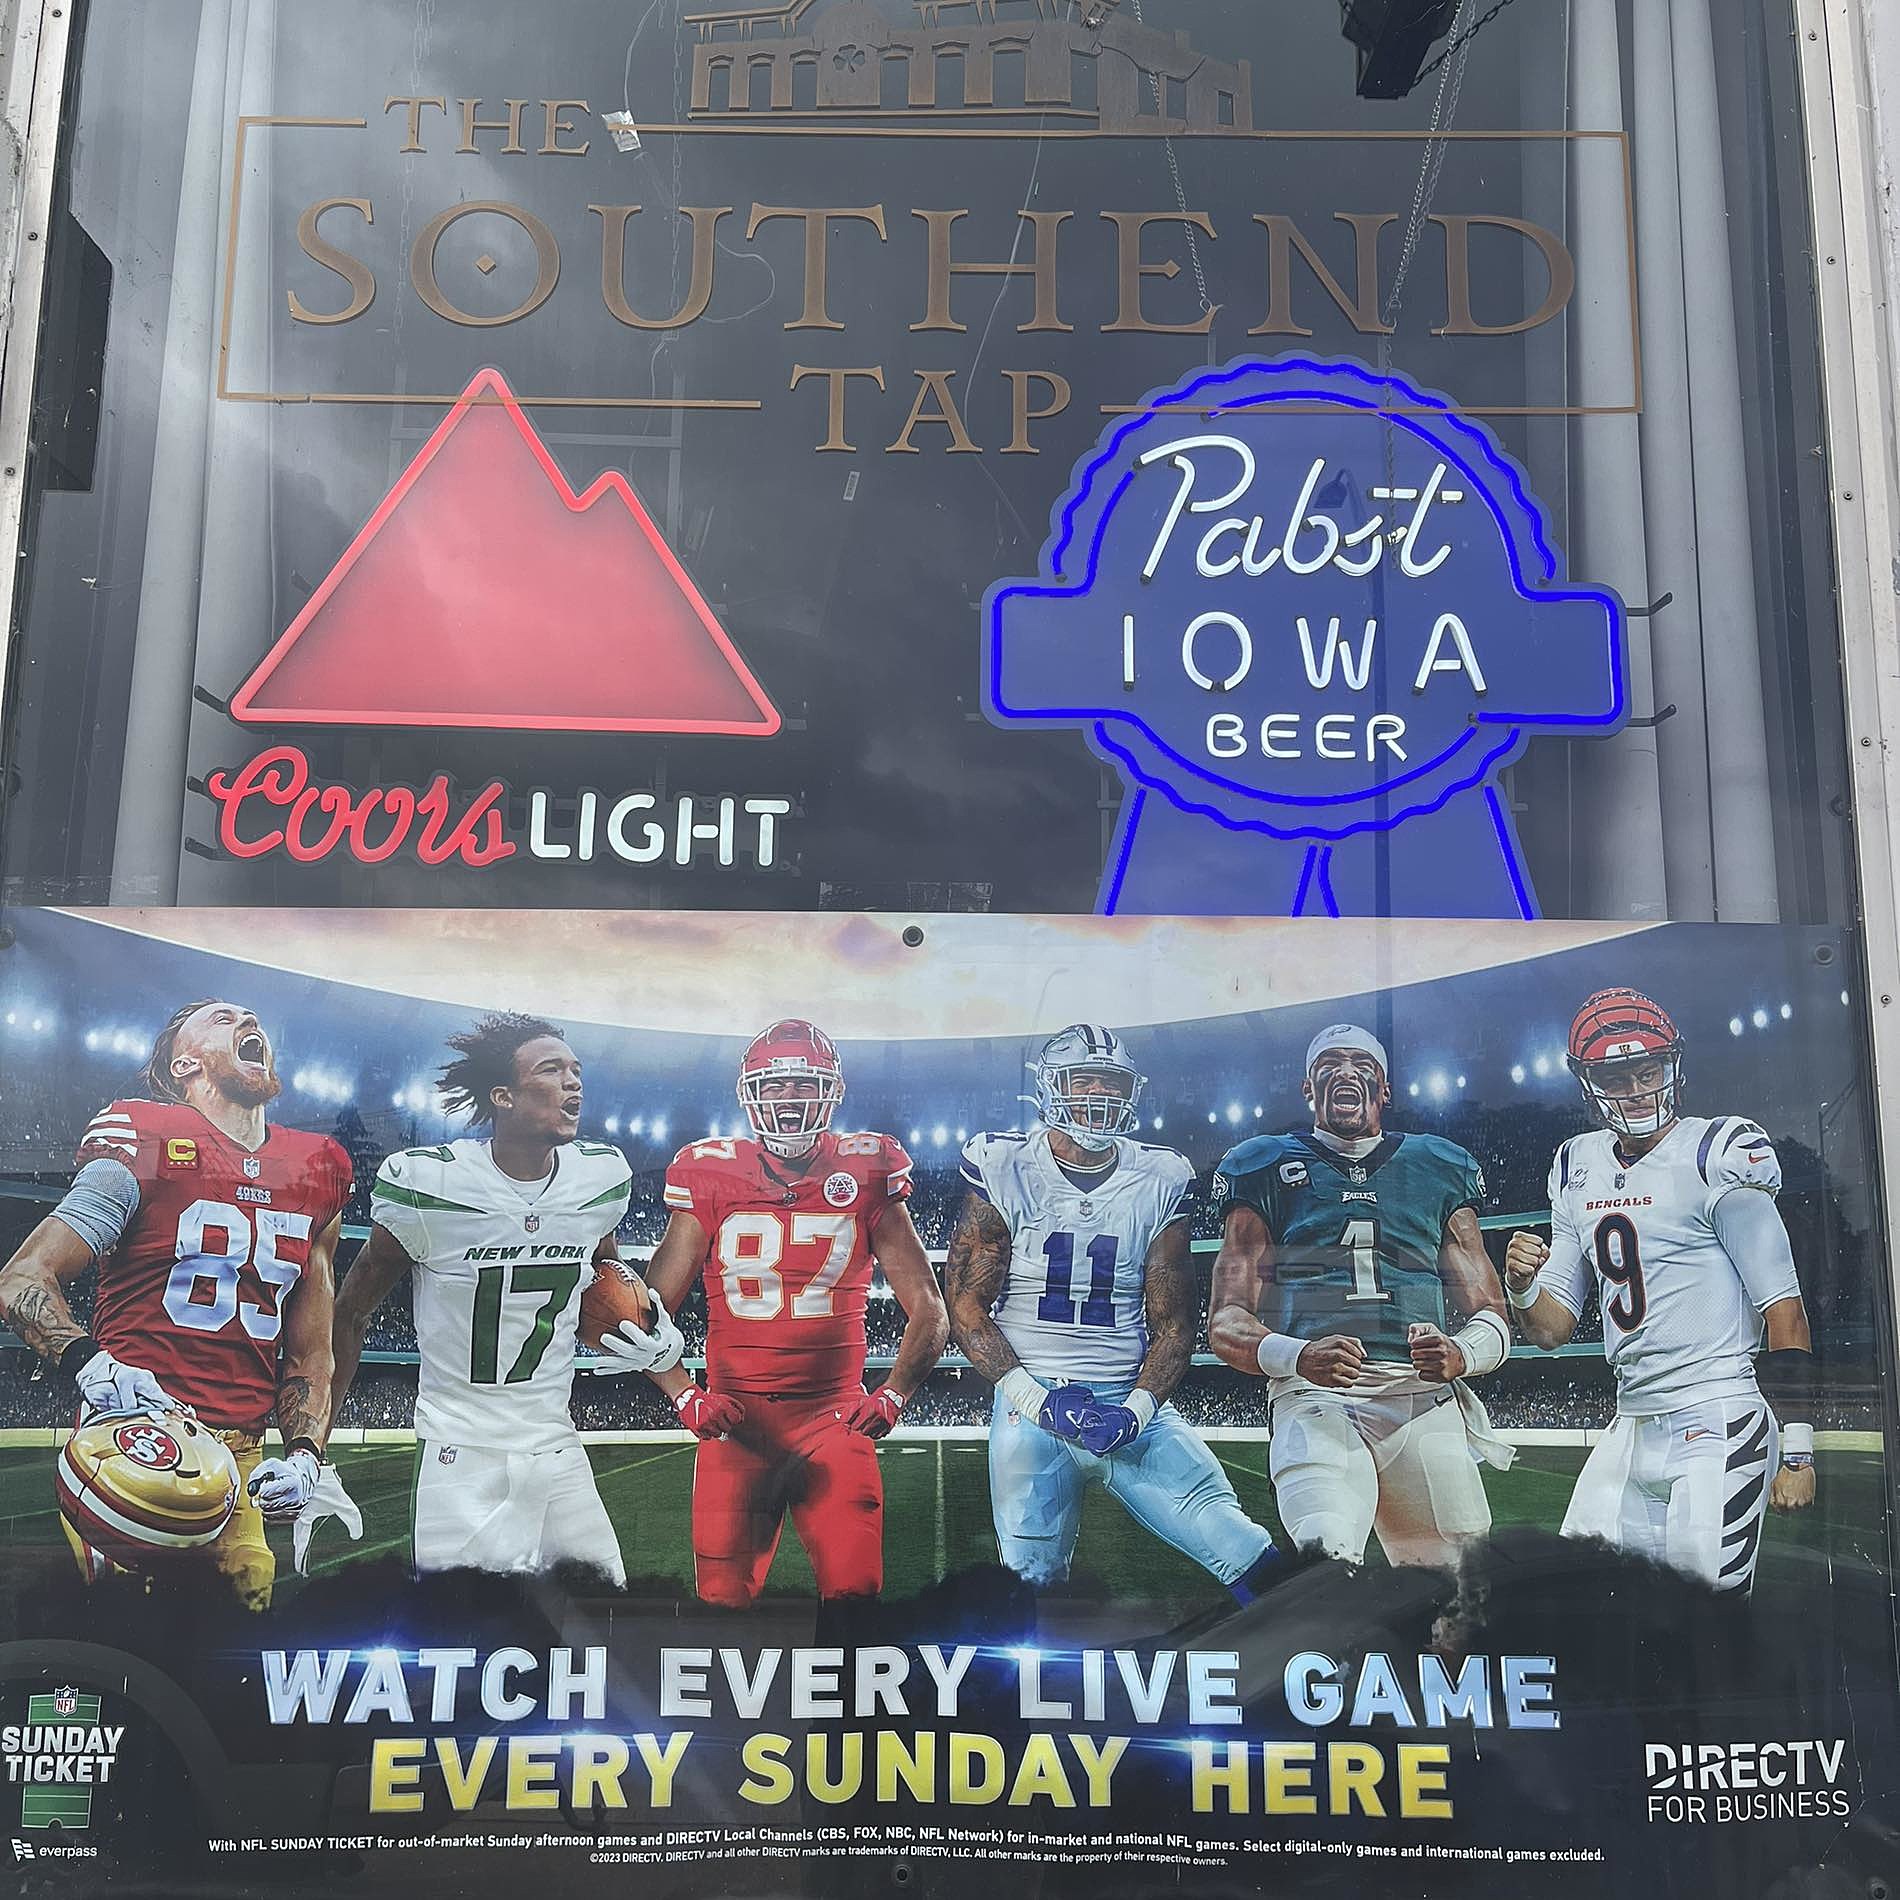 The NFL Season Kicks Off At The Southend Tap in Dubuque, IA